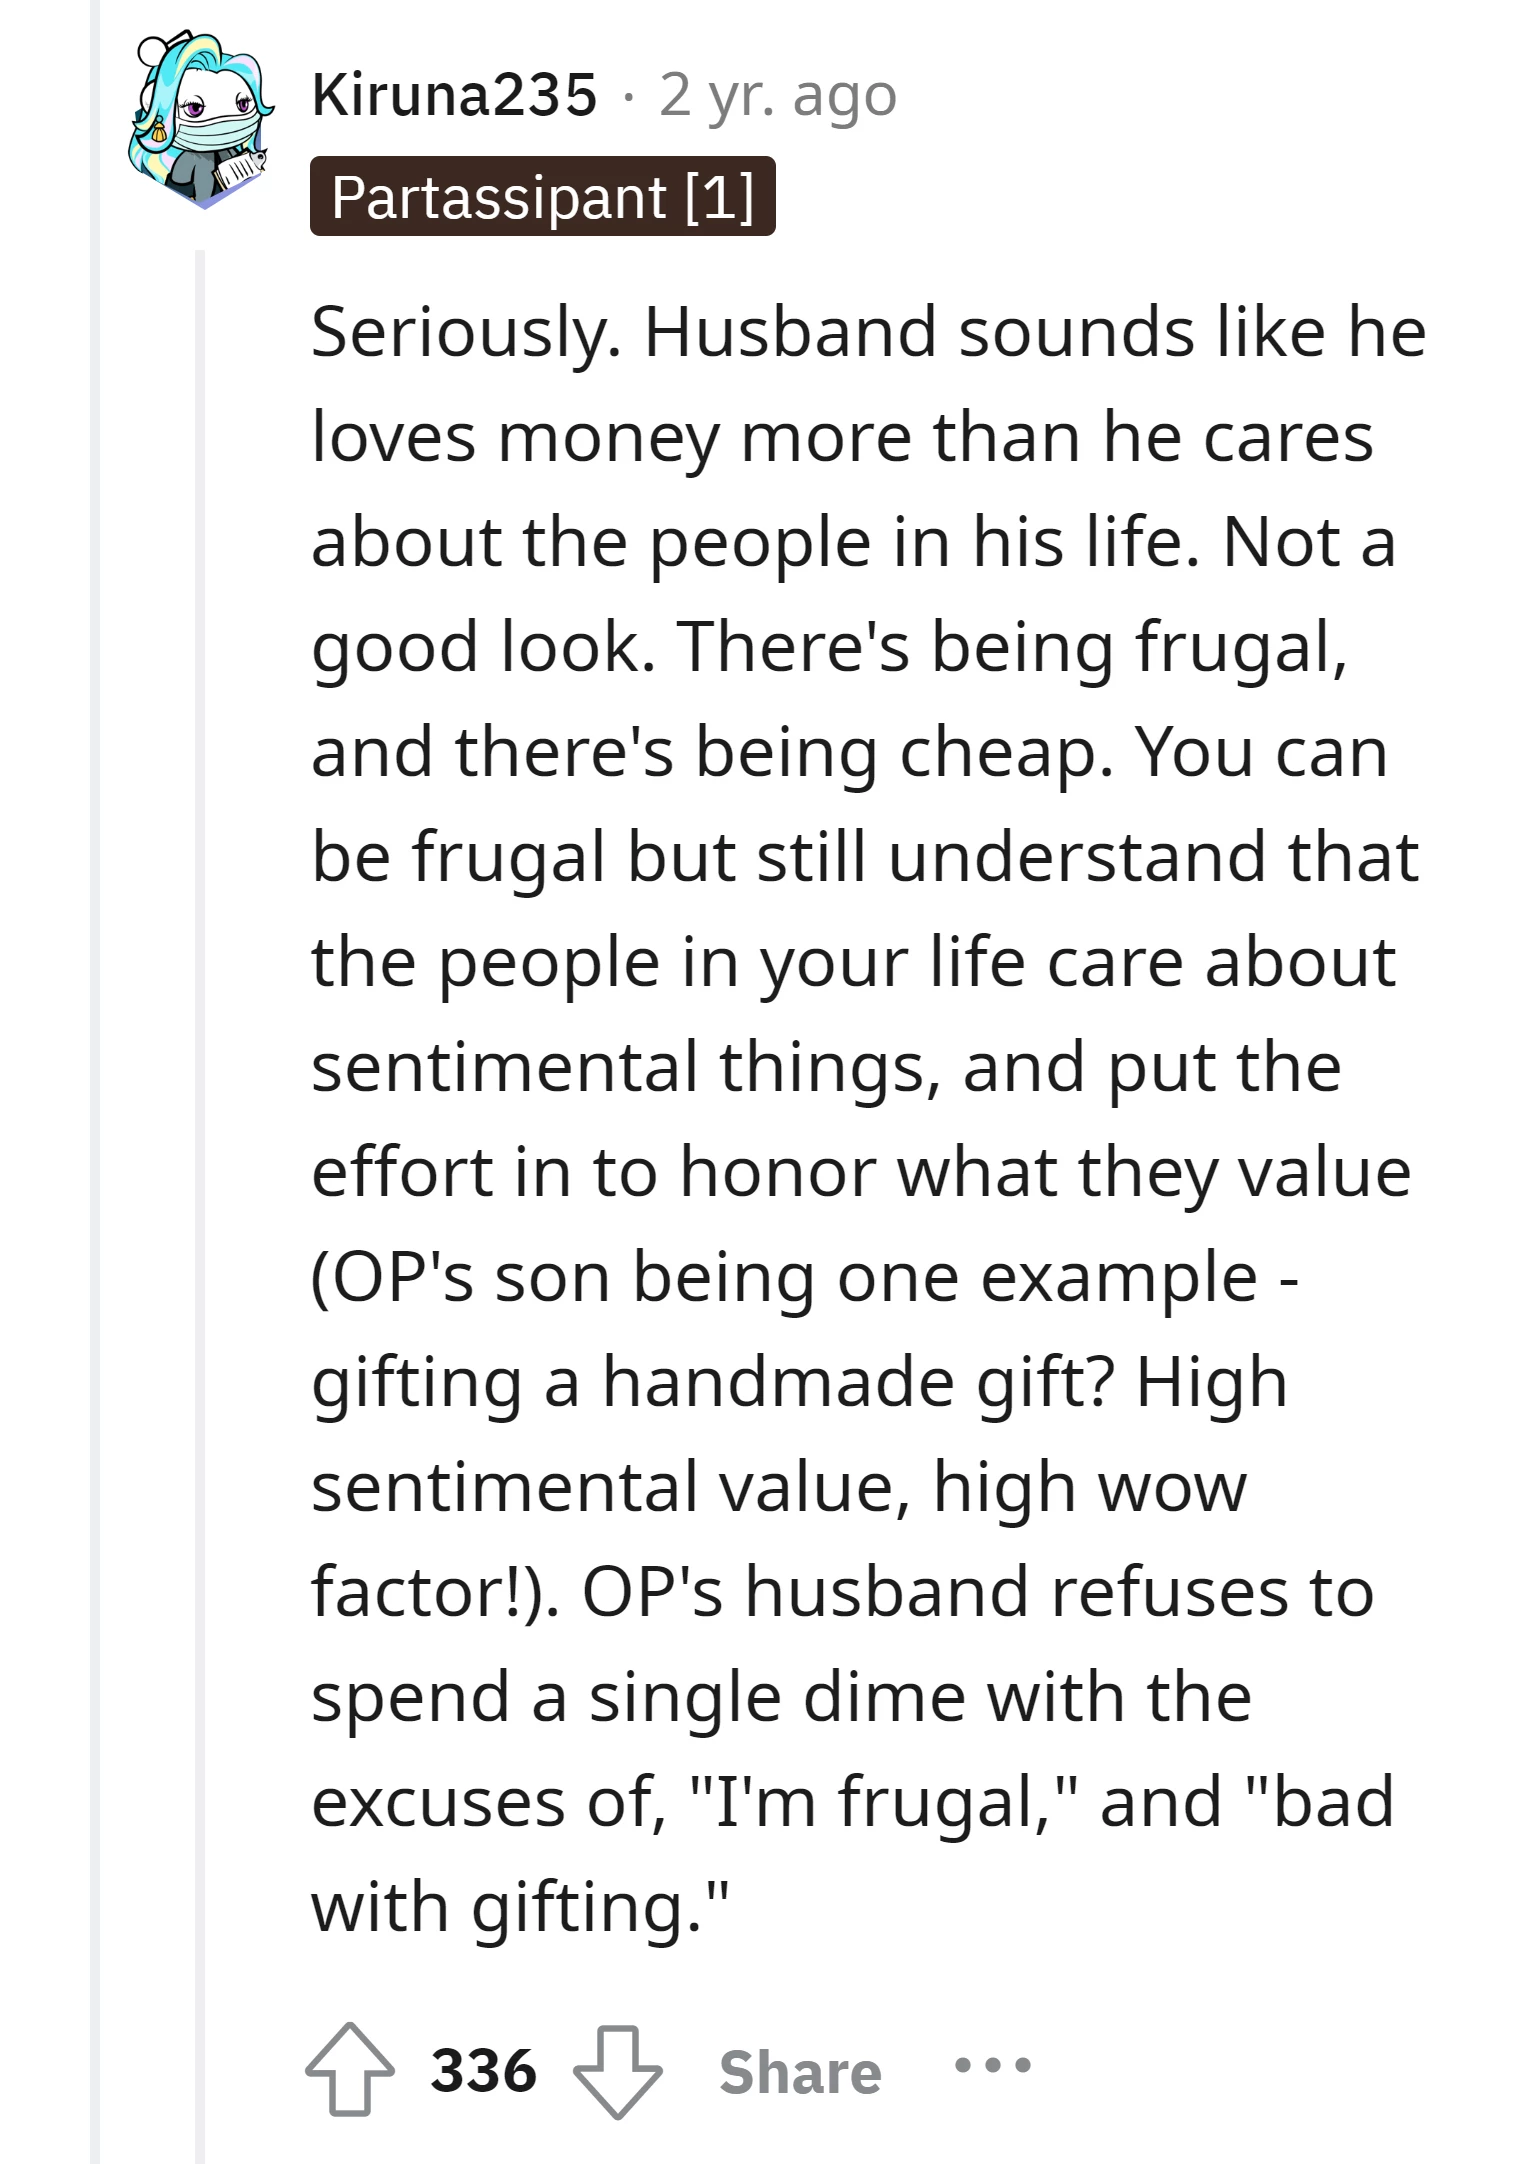 Commenter criticizes the husband for prioritizing money over relationships